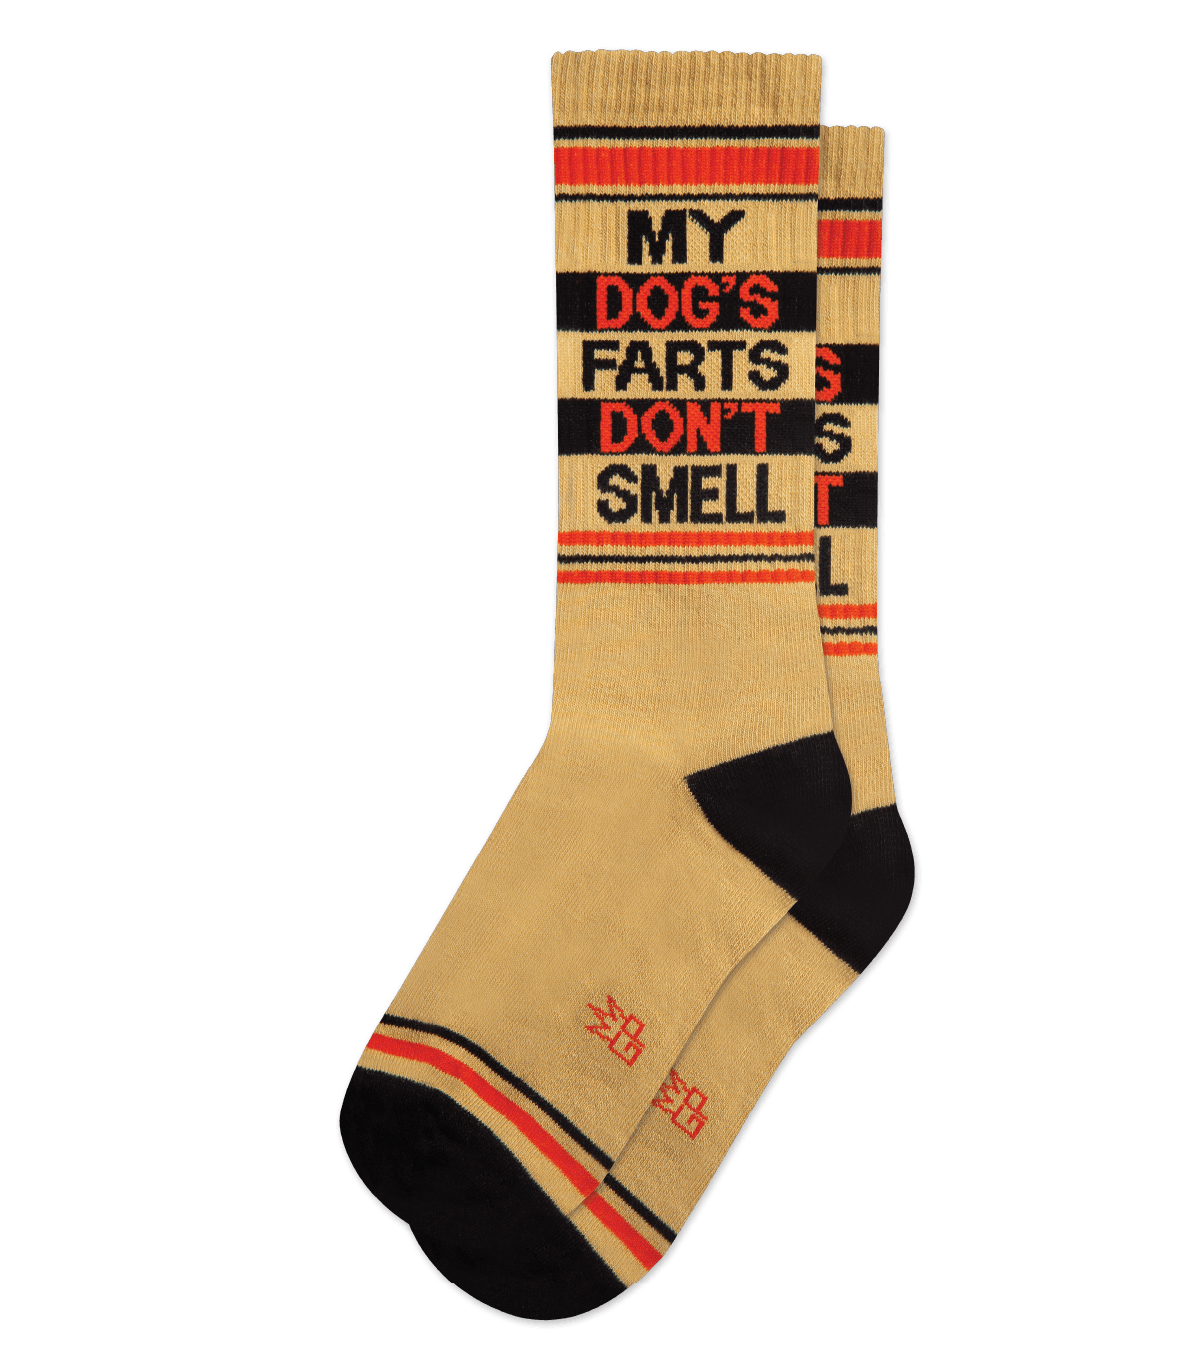 My Dog's Farts Don't Smell